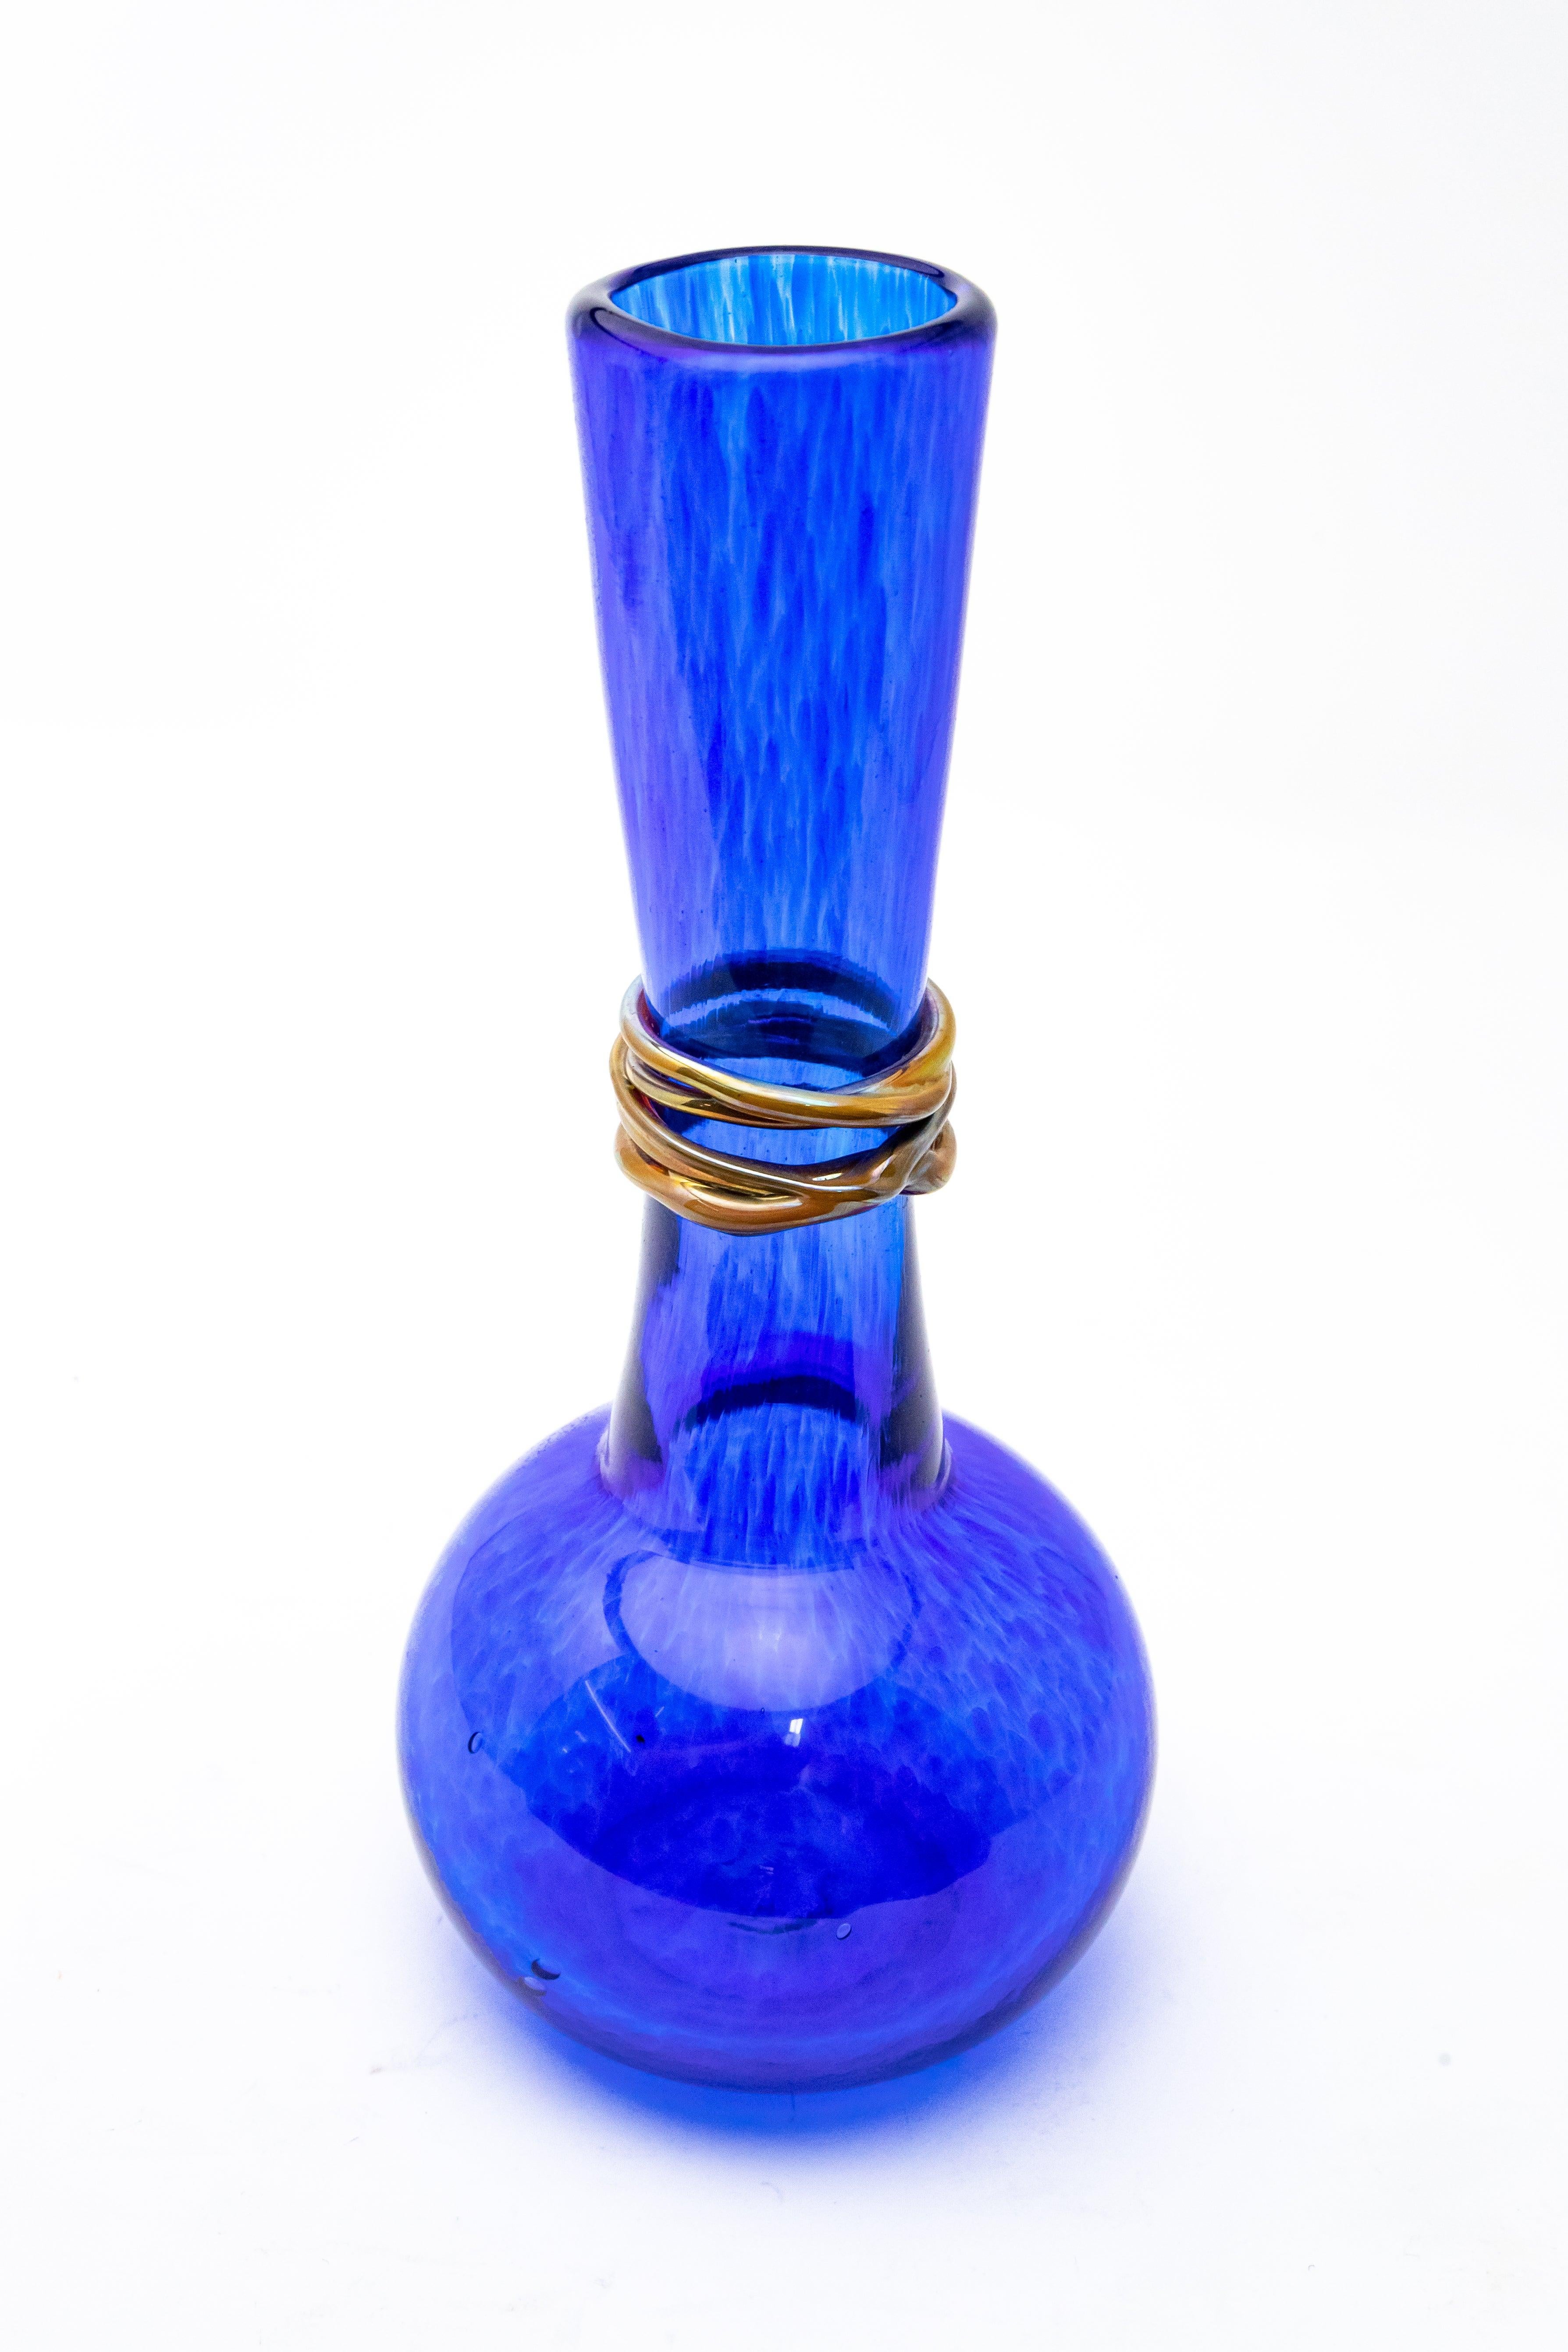 Vibrant cobalt blue forms this hand blown vase by Ingris of Chattanooga, Tennessee. An iridescent rope is twined around the neck of the piece. The vase is signed on the bottom, Ingris 04.